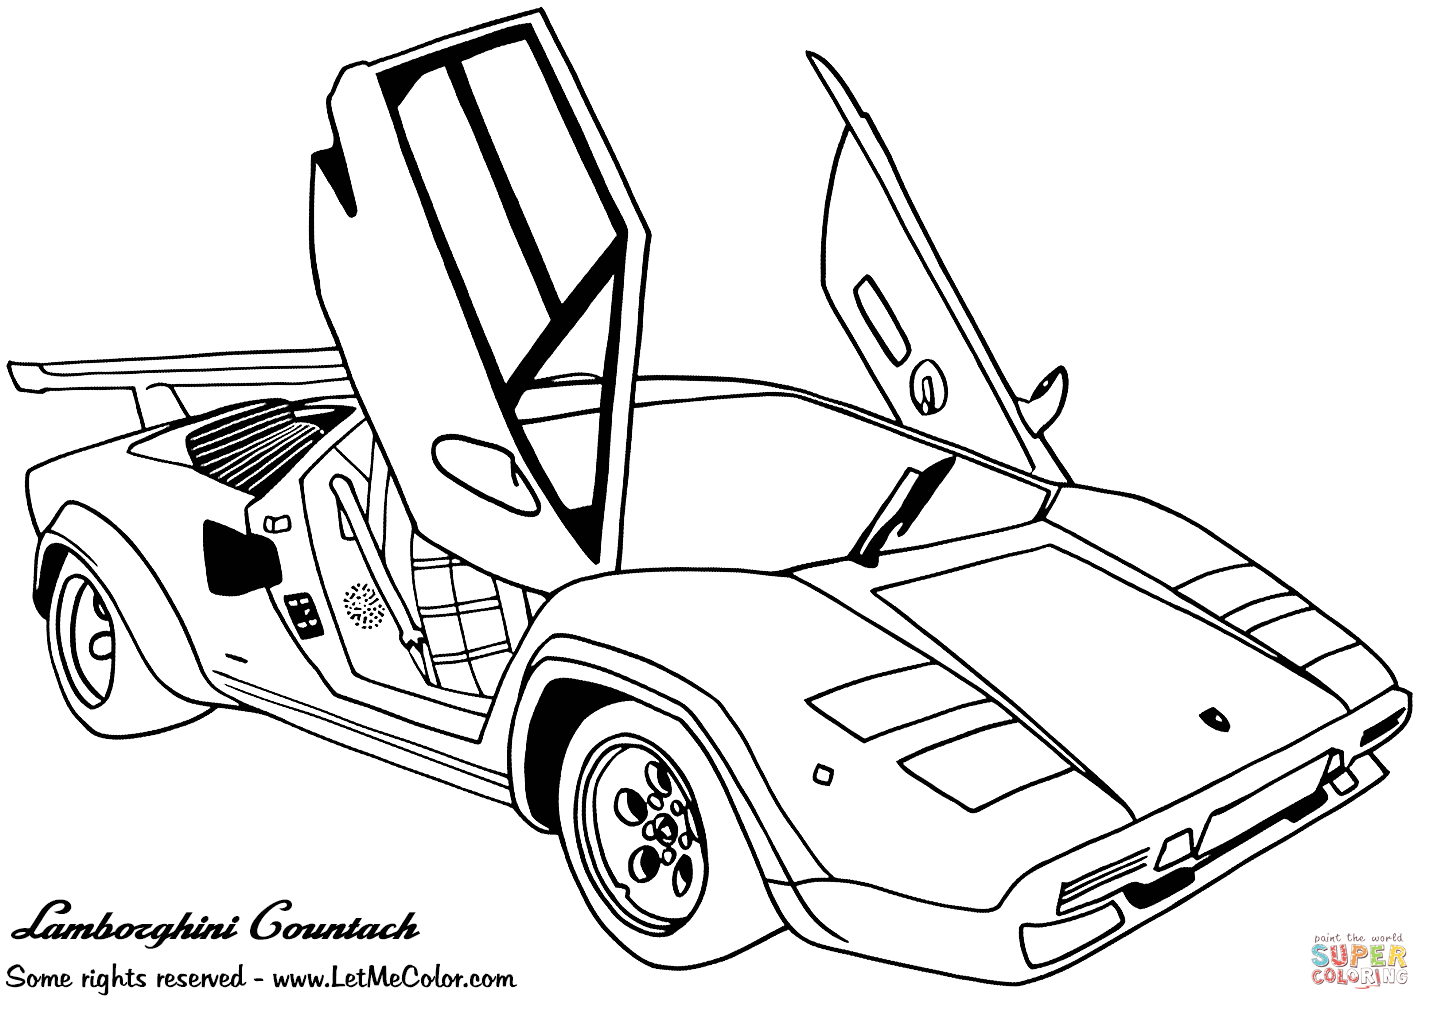 Lamborghini countach coloring page free printable coloring pages